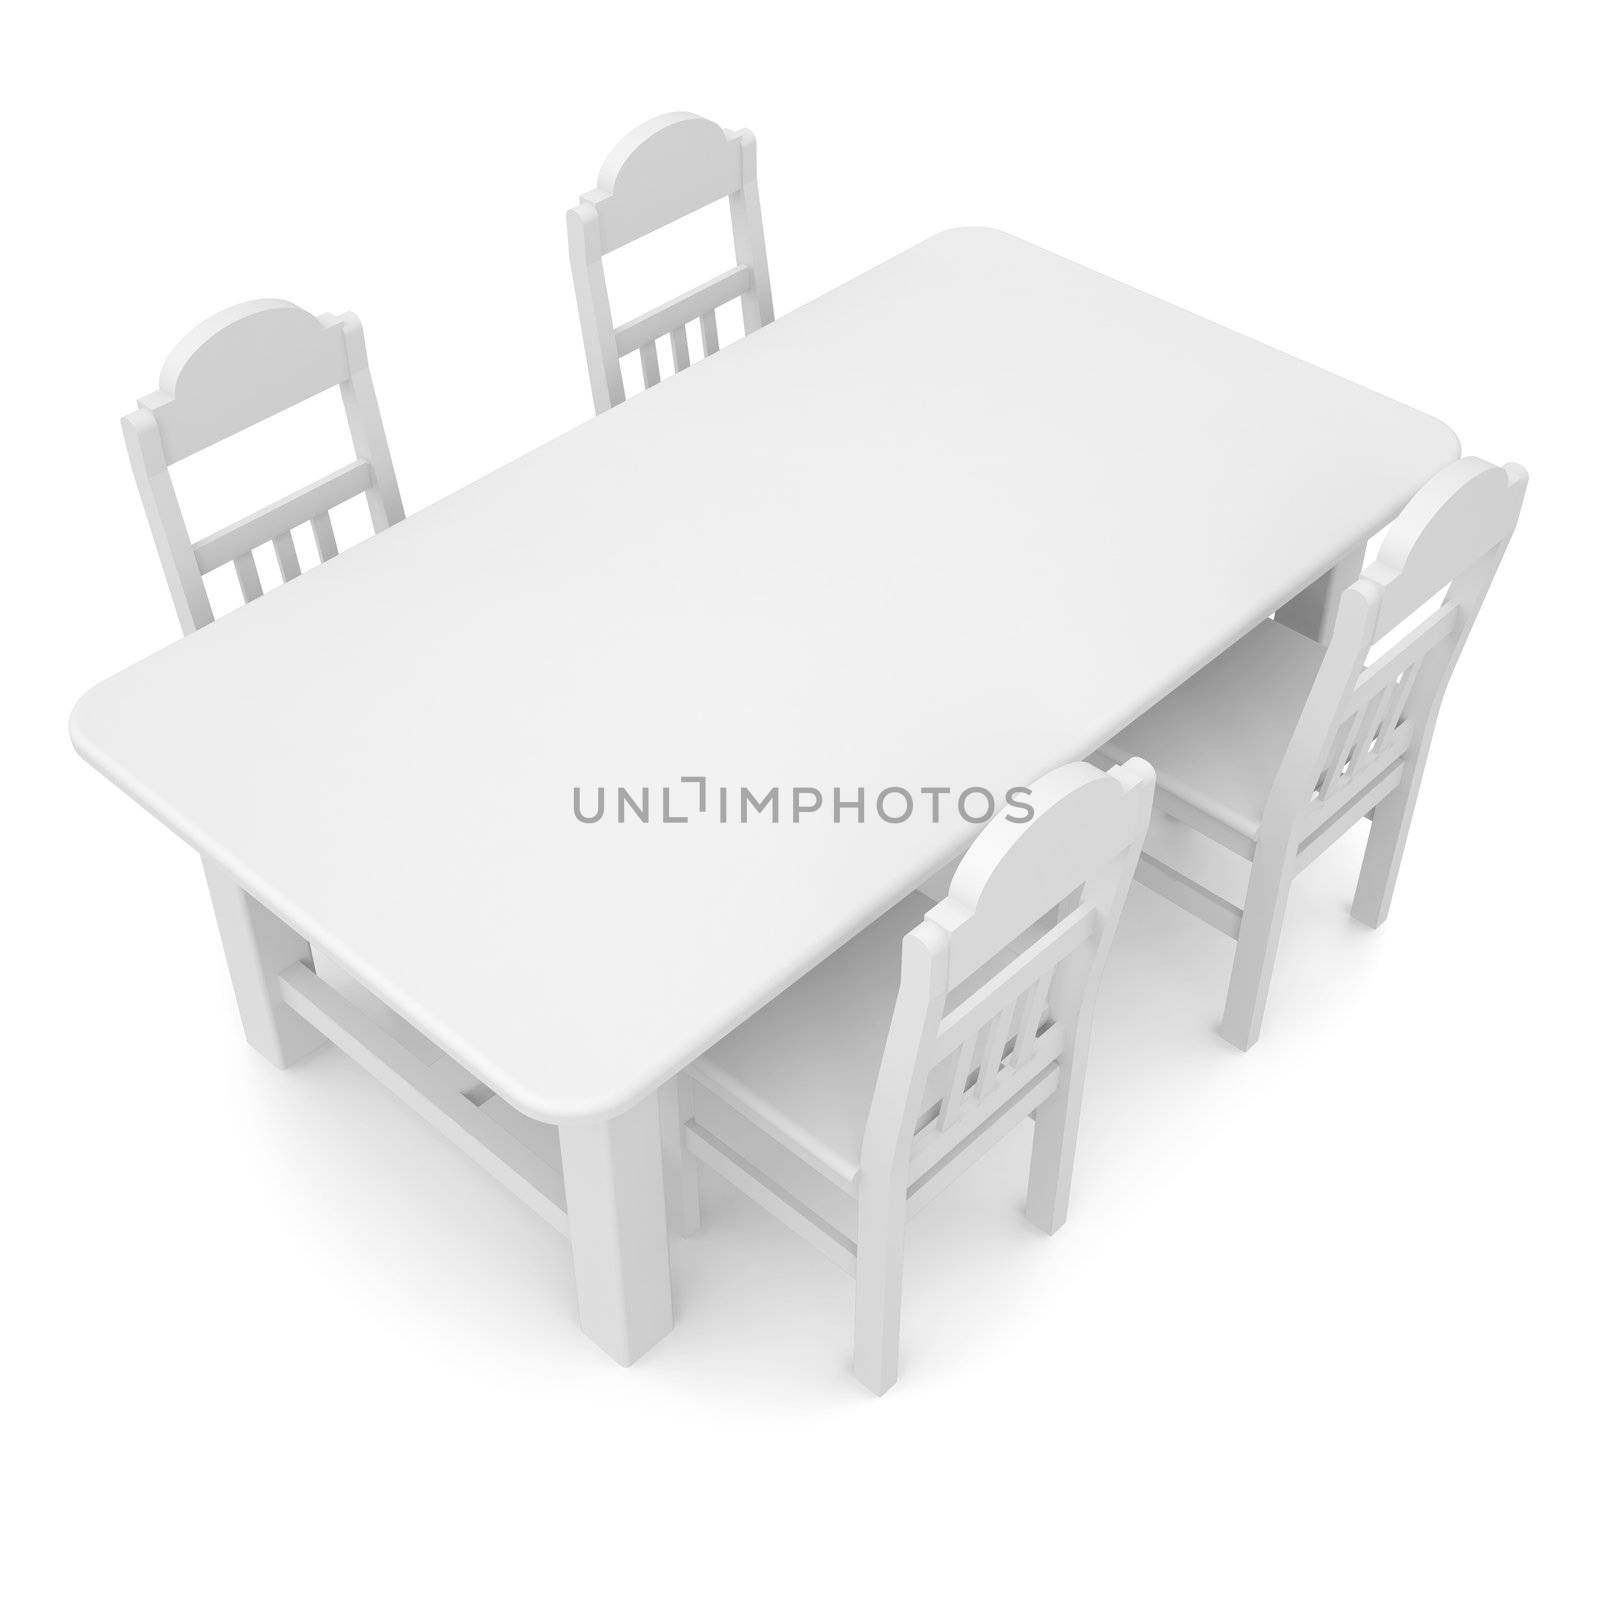 White table and chairs by cherezoff